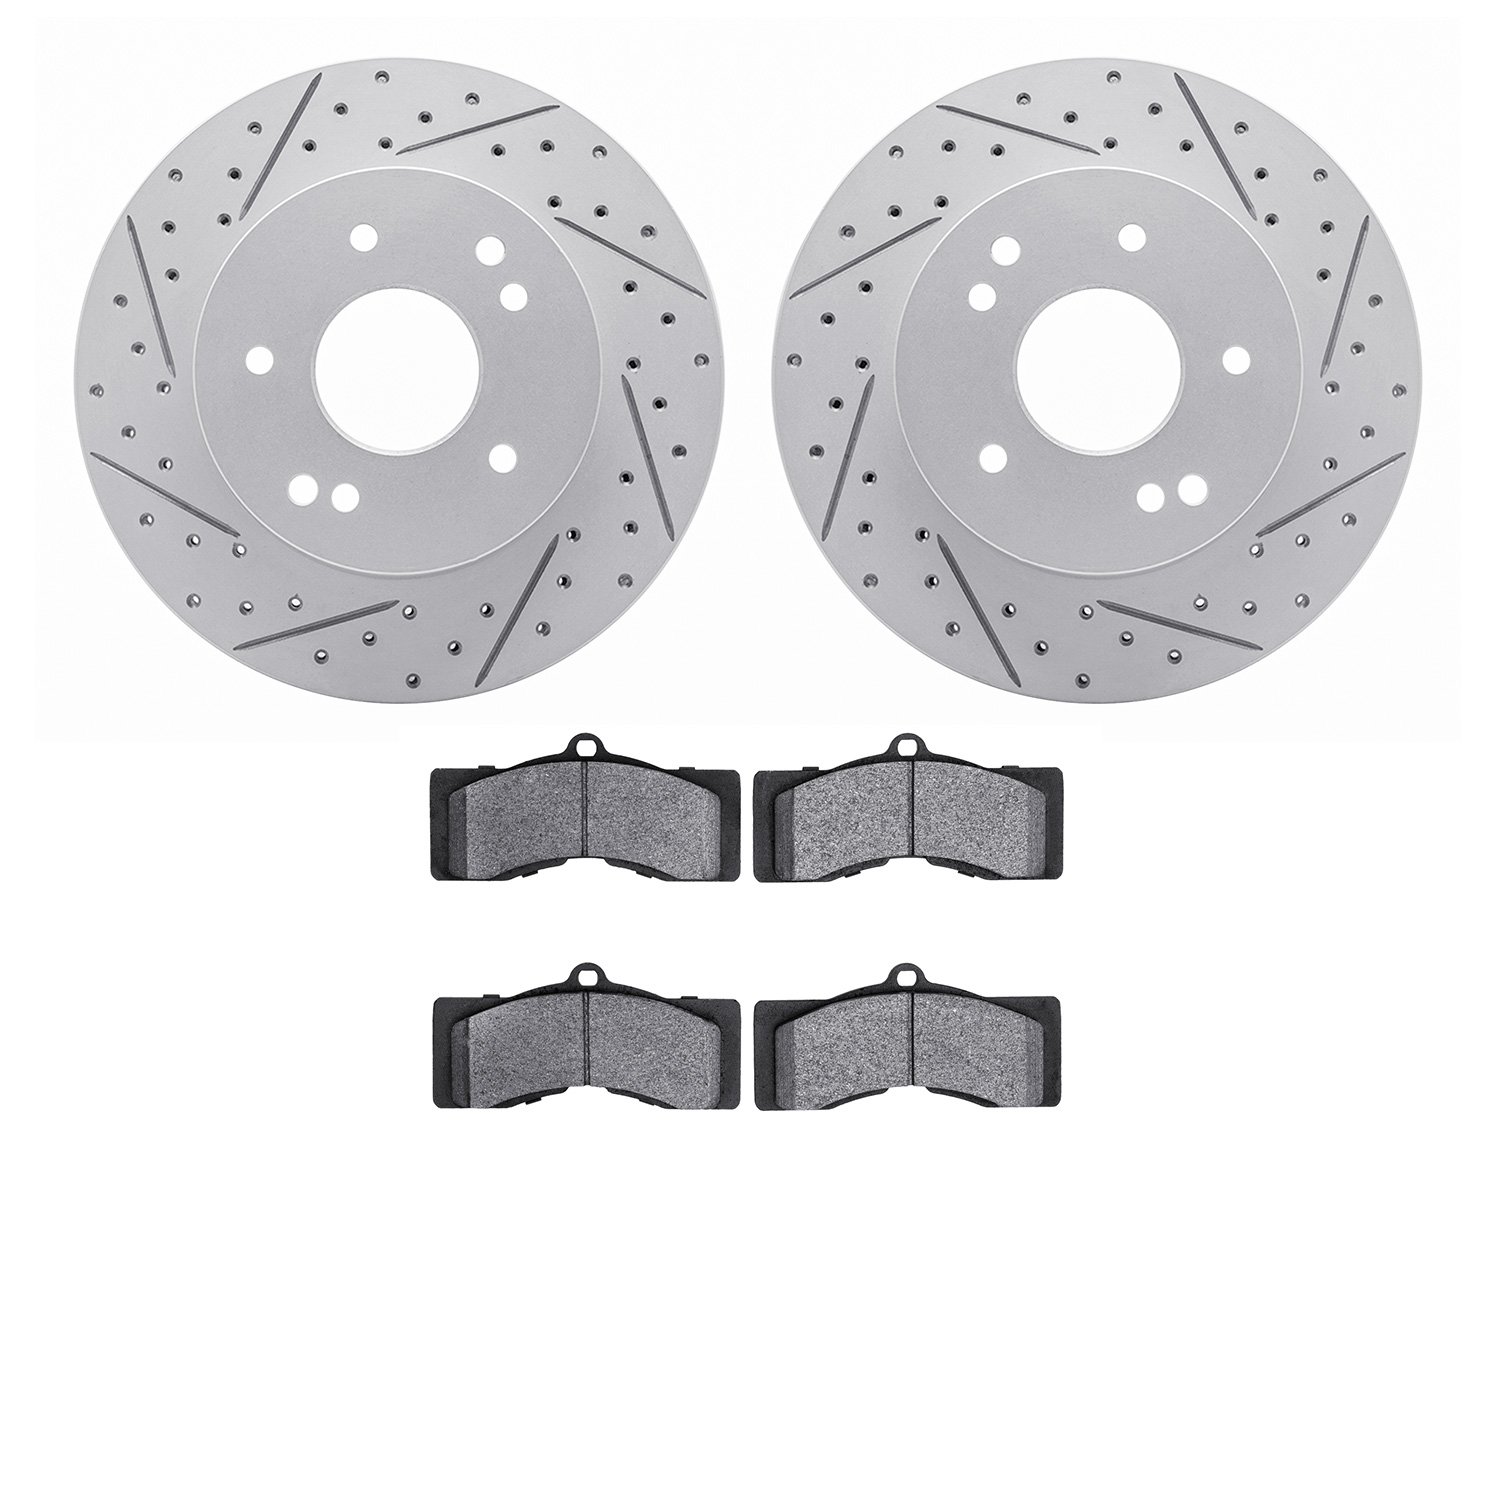 2502-47003 Geoperformance Drilled/Slotted Rotors w/5000 Advanced Brake Pads Kit, 1963-1982 GM, Position: Front, Rear